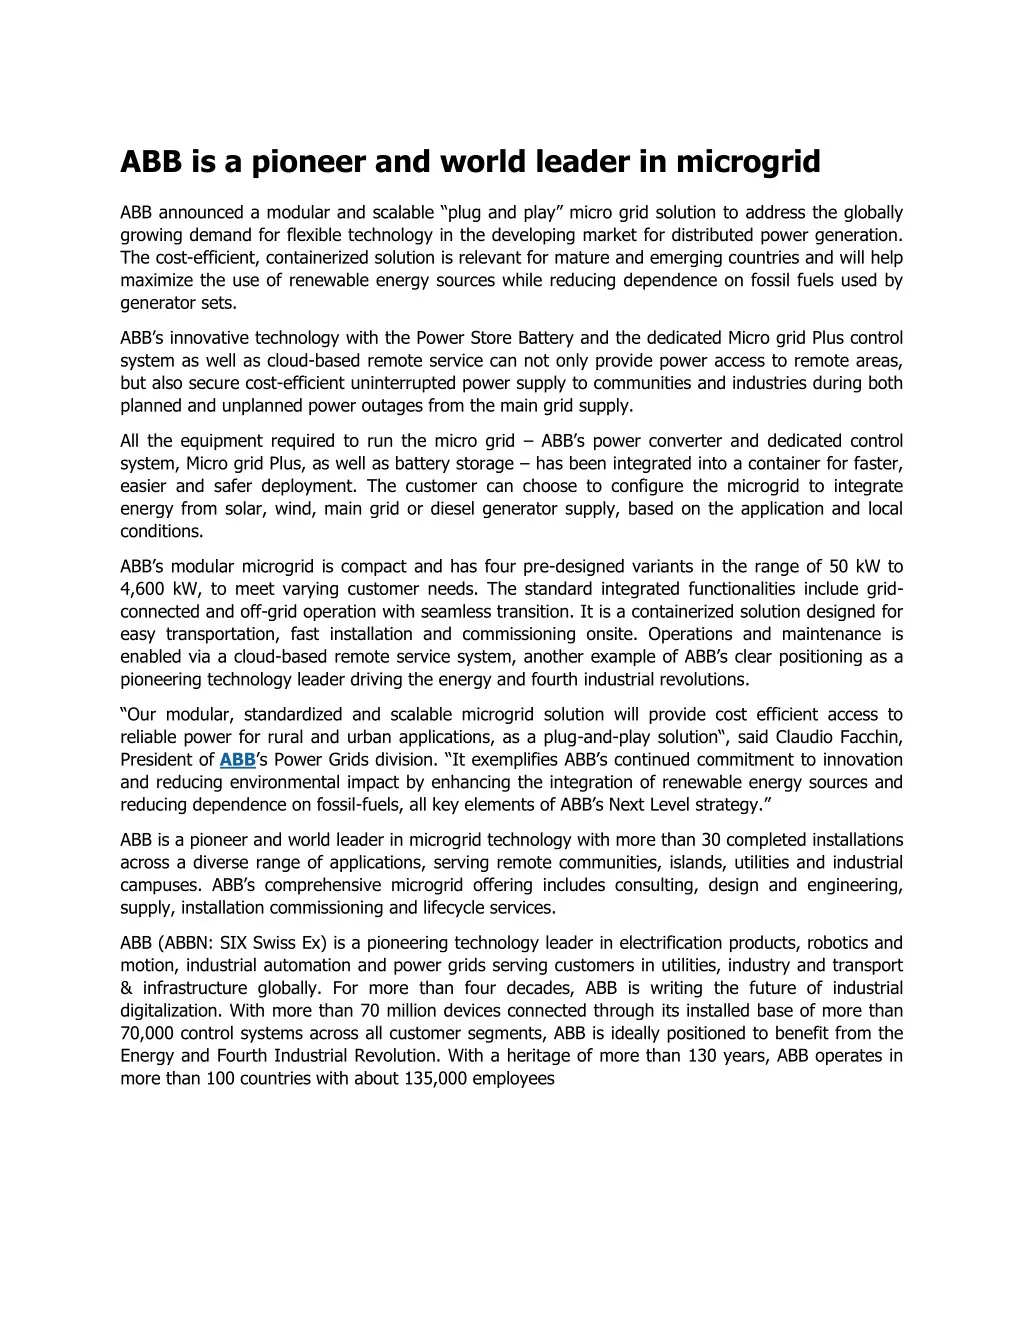 abb is a pioneer and world leader in microgrid